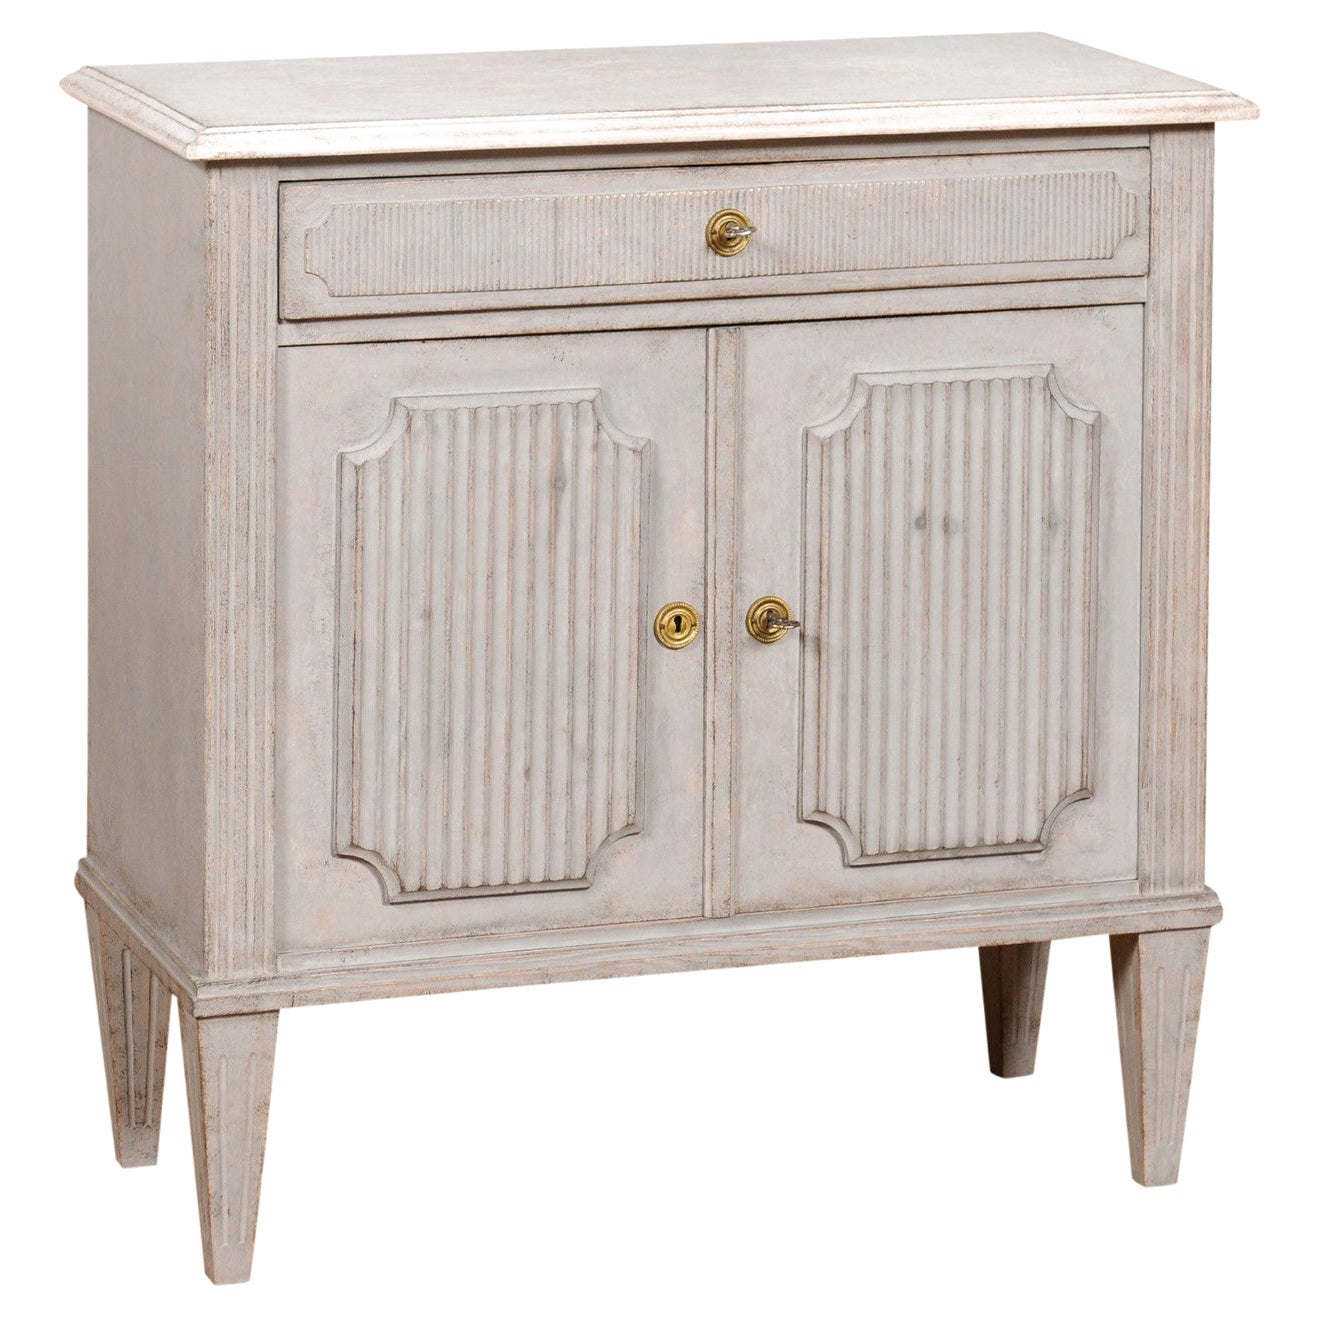 Swedish Gustavian Style 19th Century Painted Wood Sideboard with Reeded Motifs For Sale